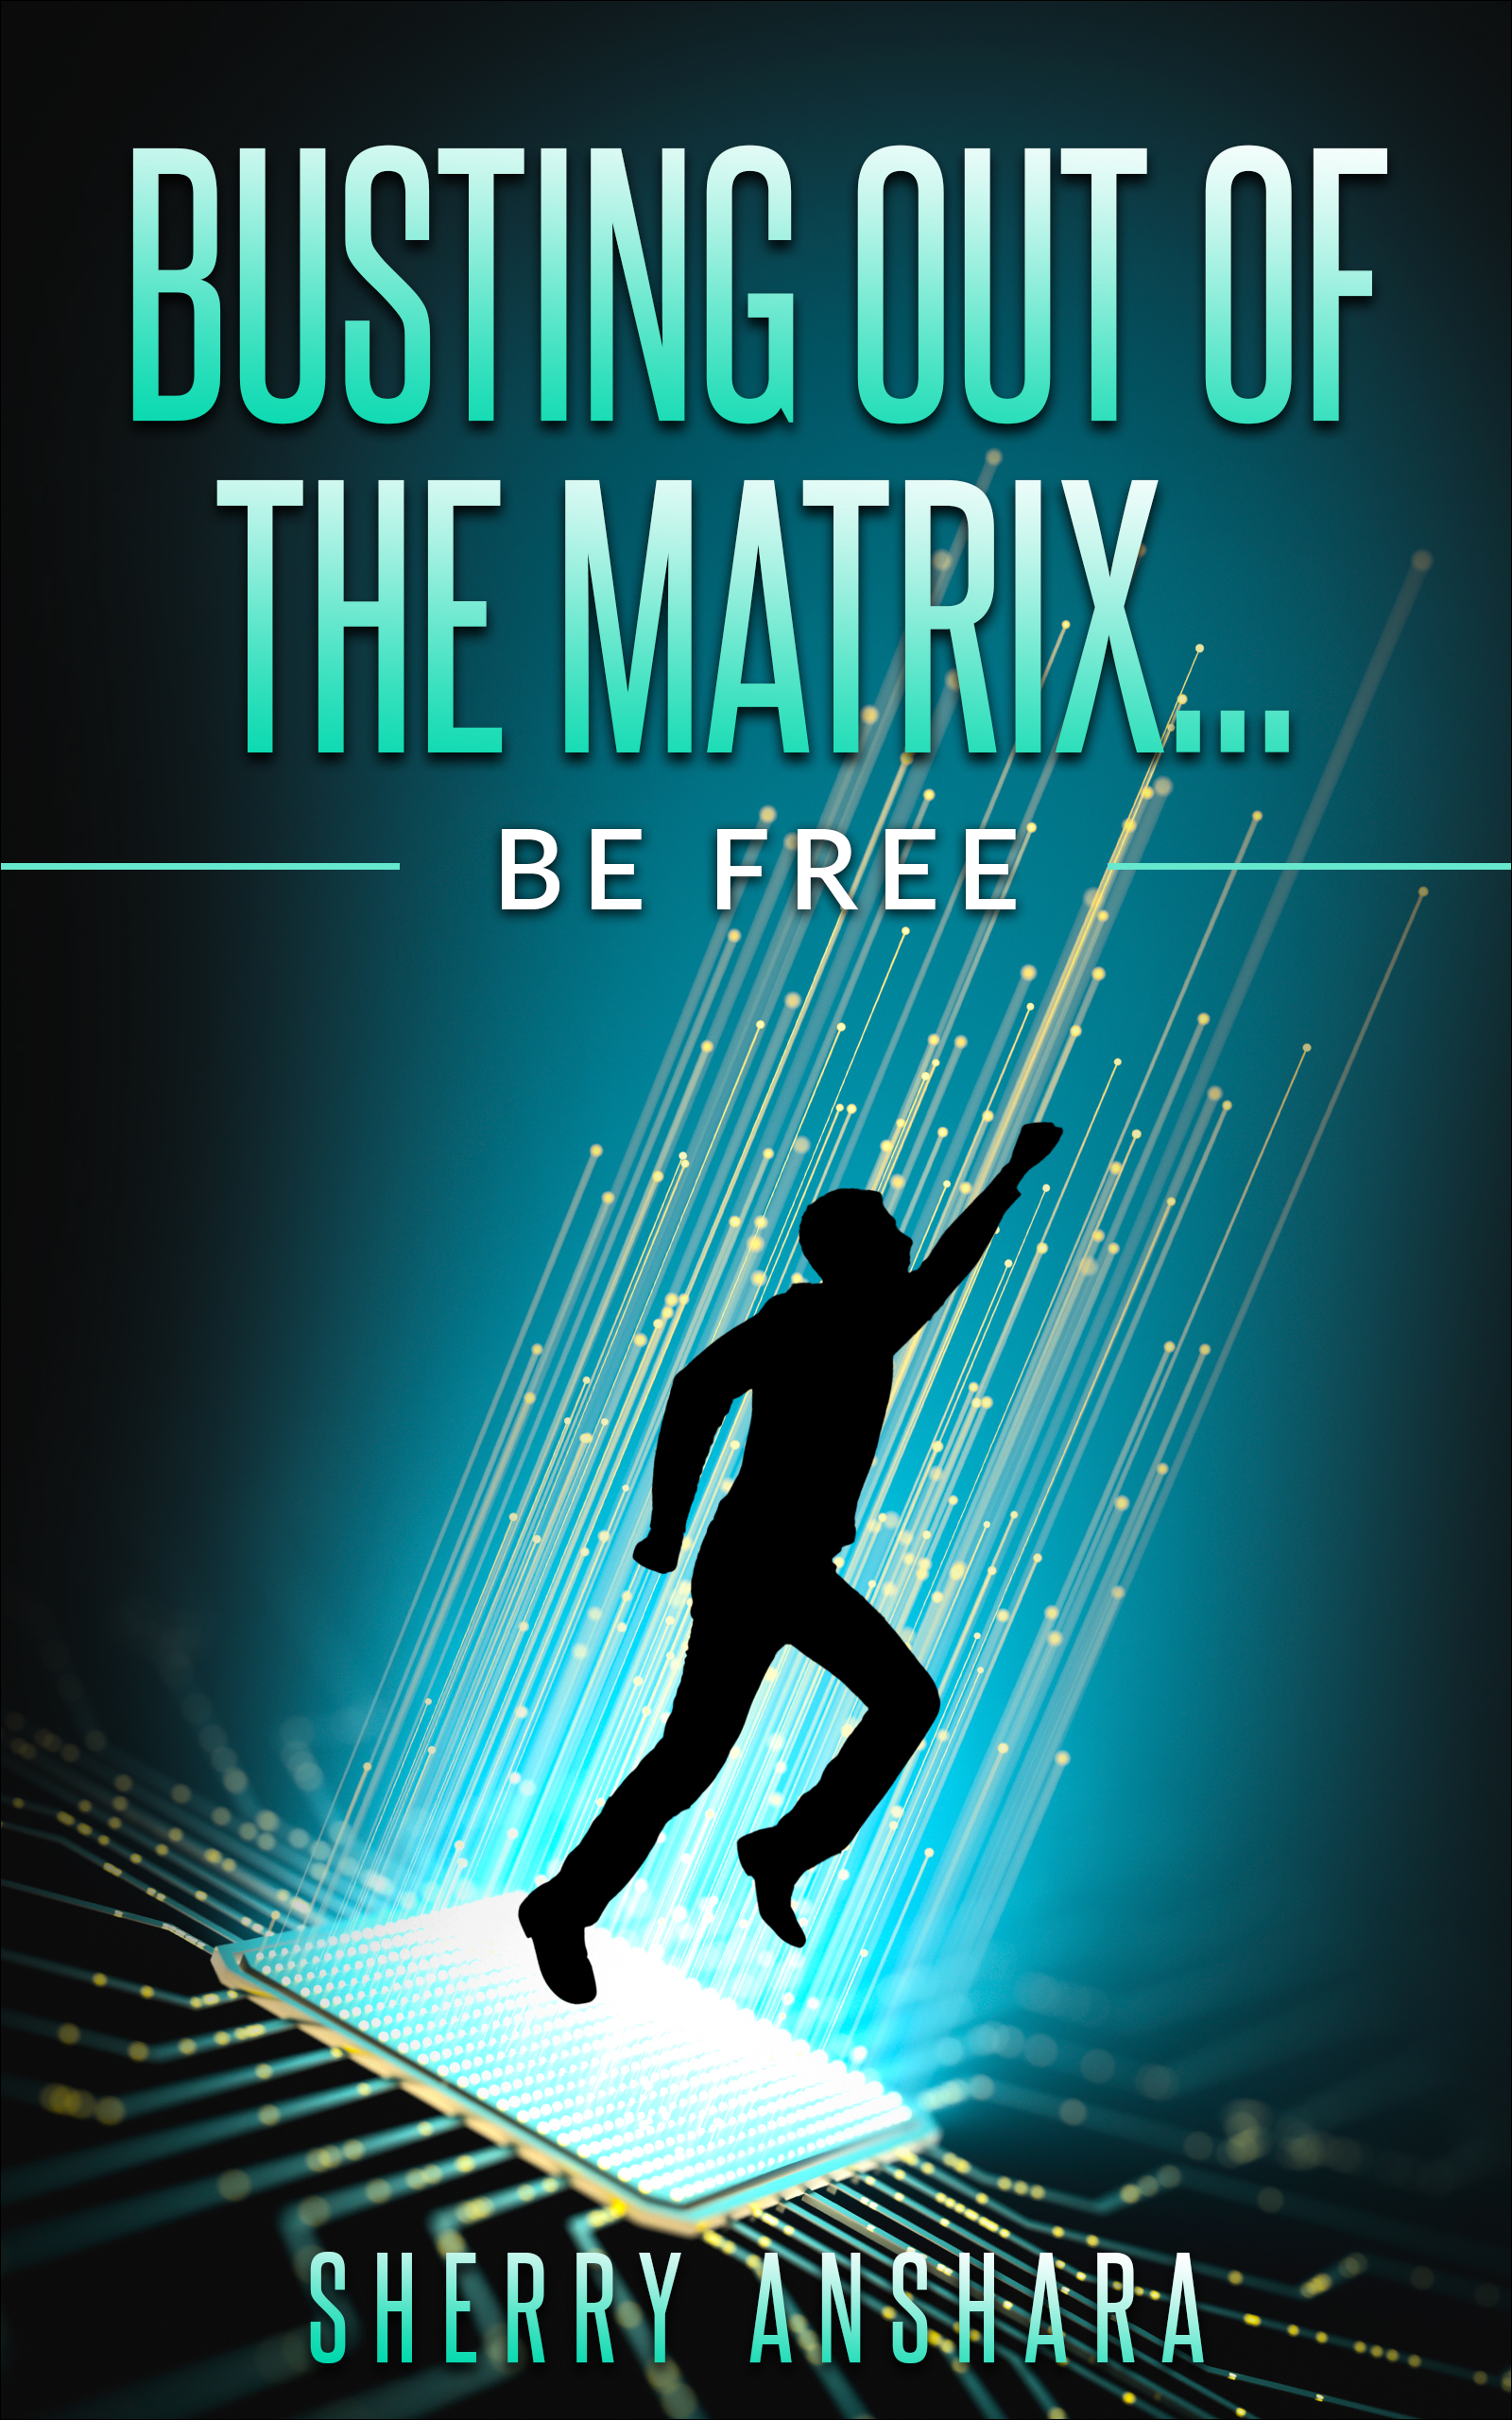 Busting Out of the Matrix by Sherry Anshara